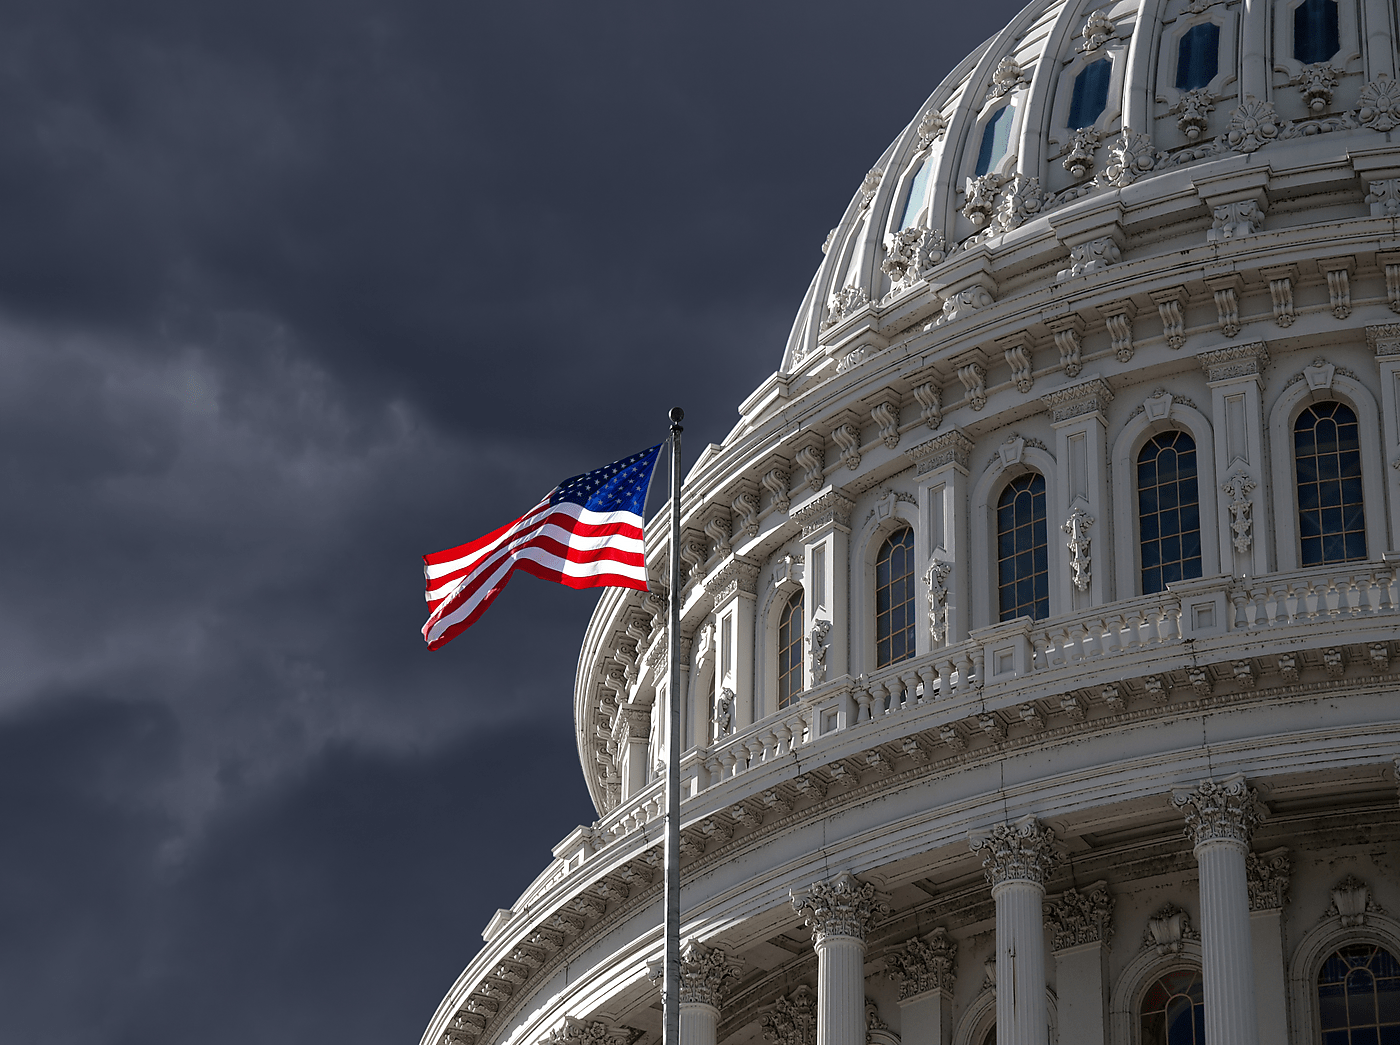 An American flag waves in front of the Capitol with a stormy sky